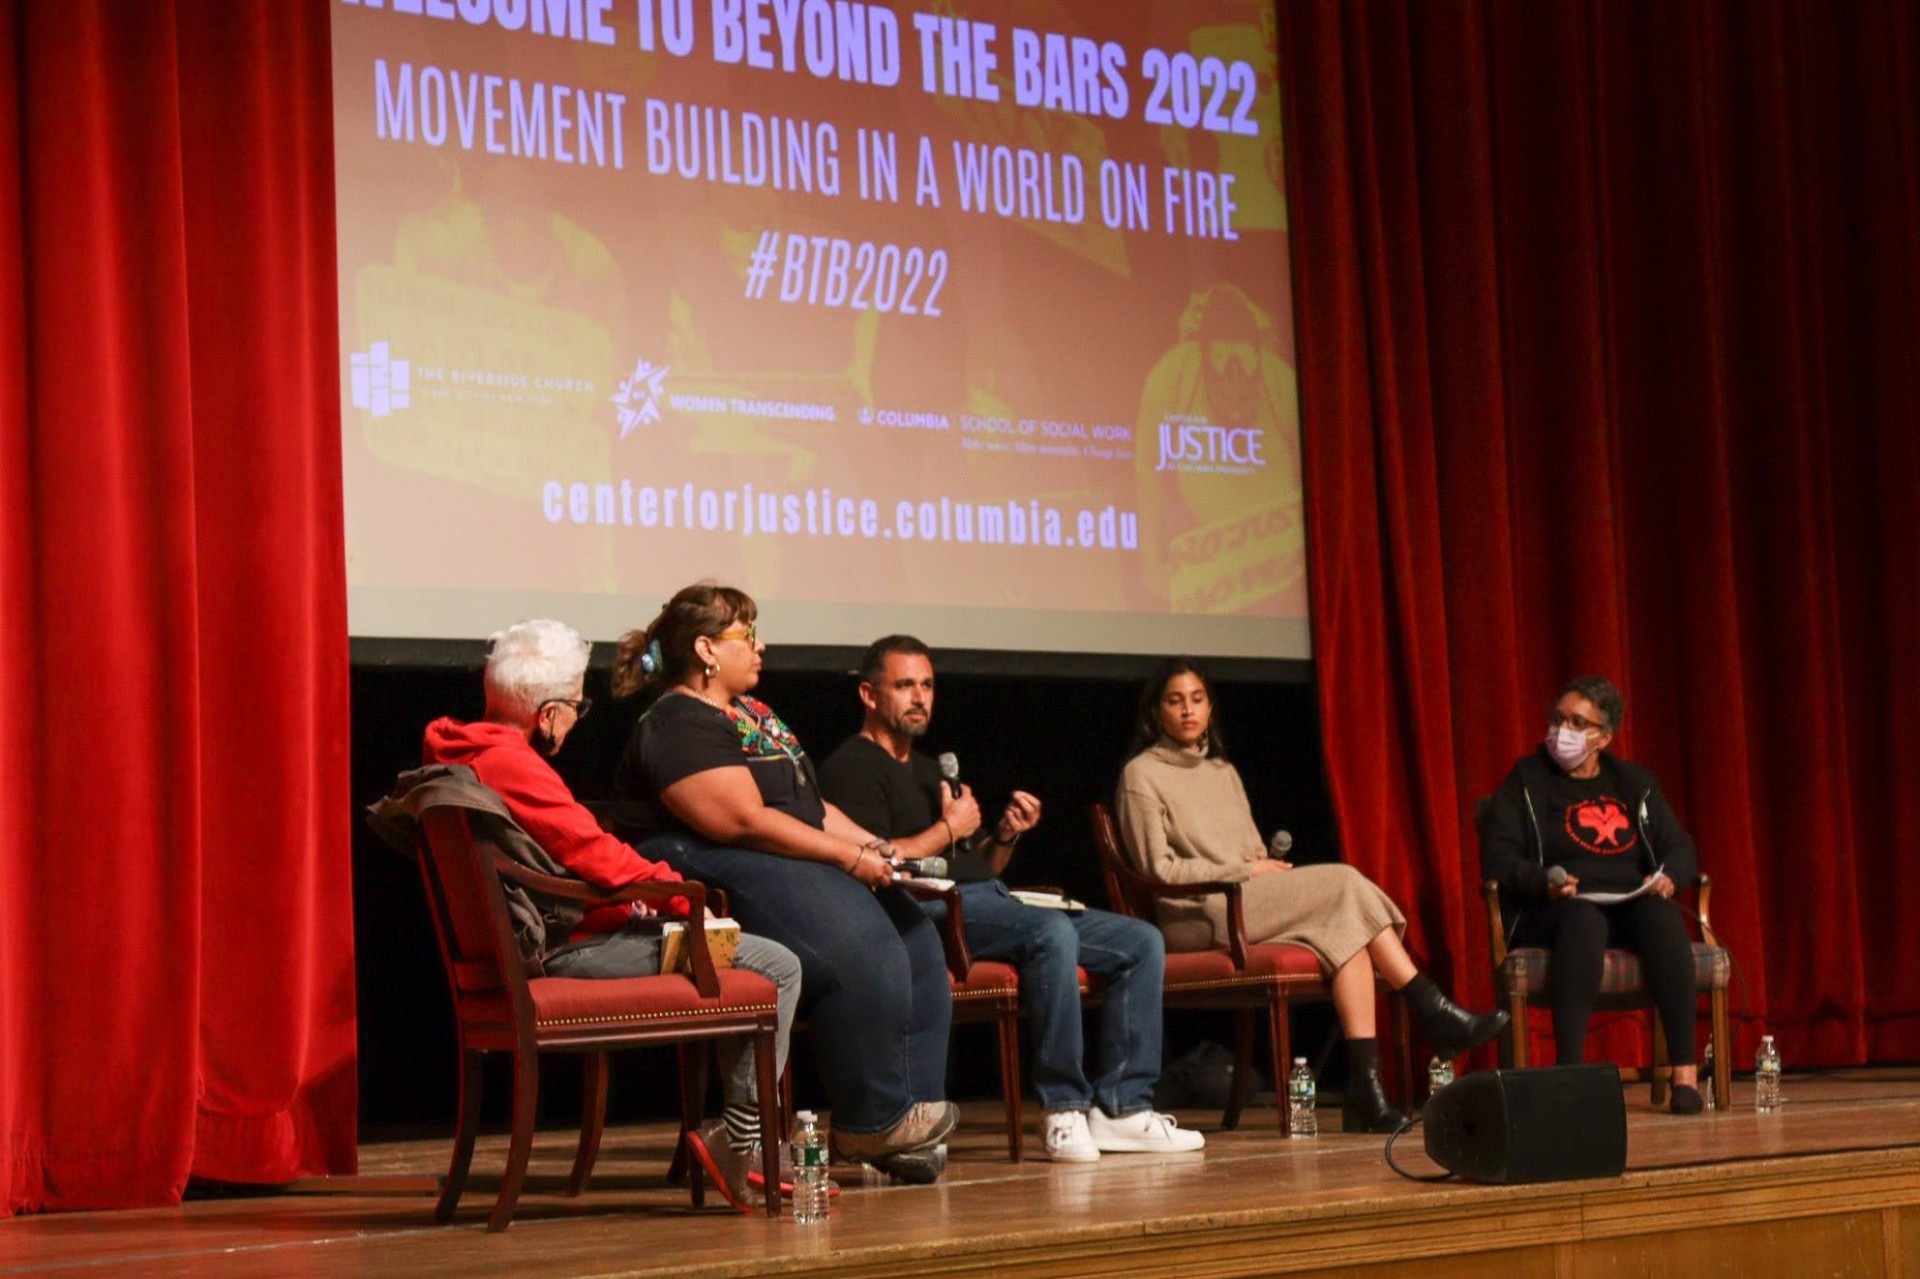 Panel from the 2022 Beyond the Bars Conference